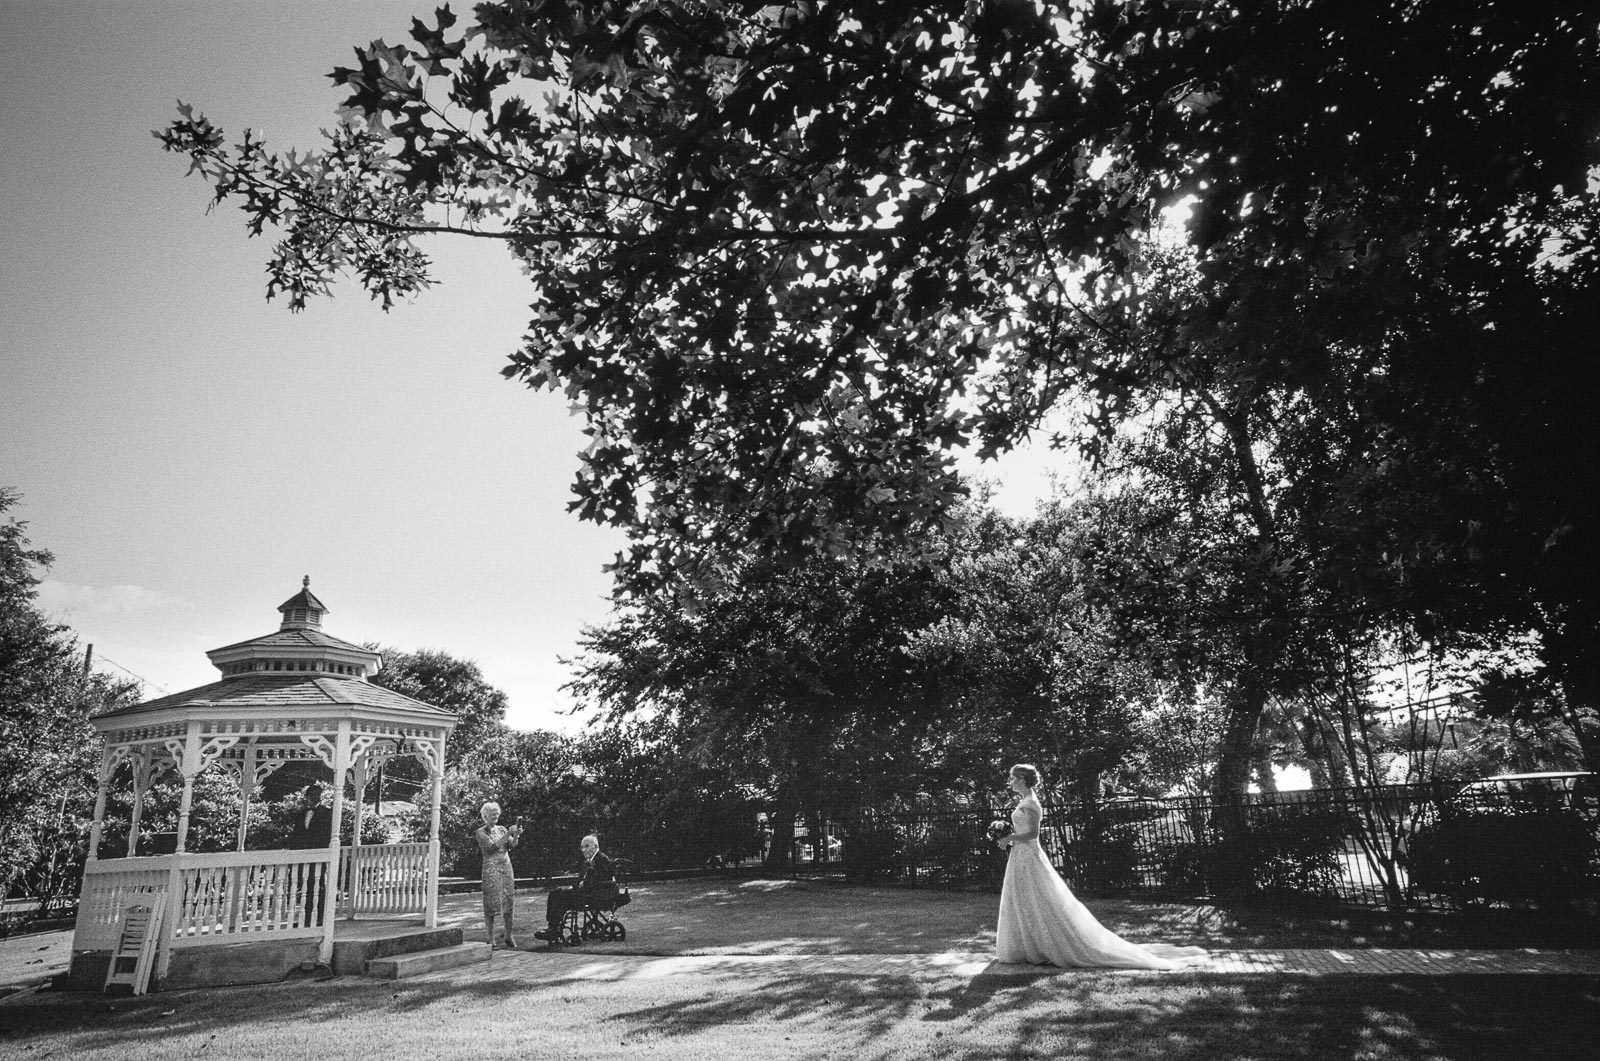 The bride walks down to the gazebo during the COVID-19 pandemic at Wedding at the The Grande Ballroom in New Braunfels Texas